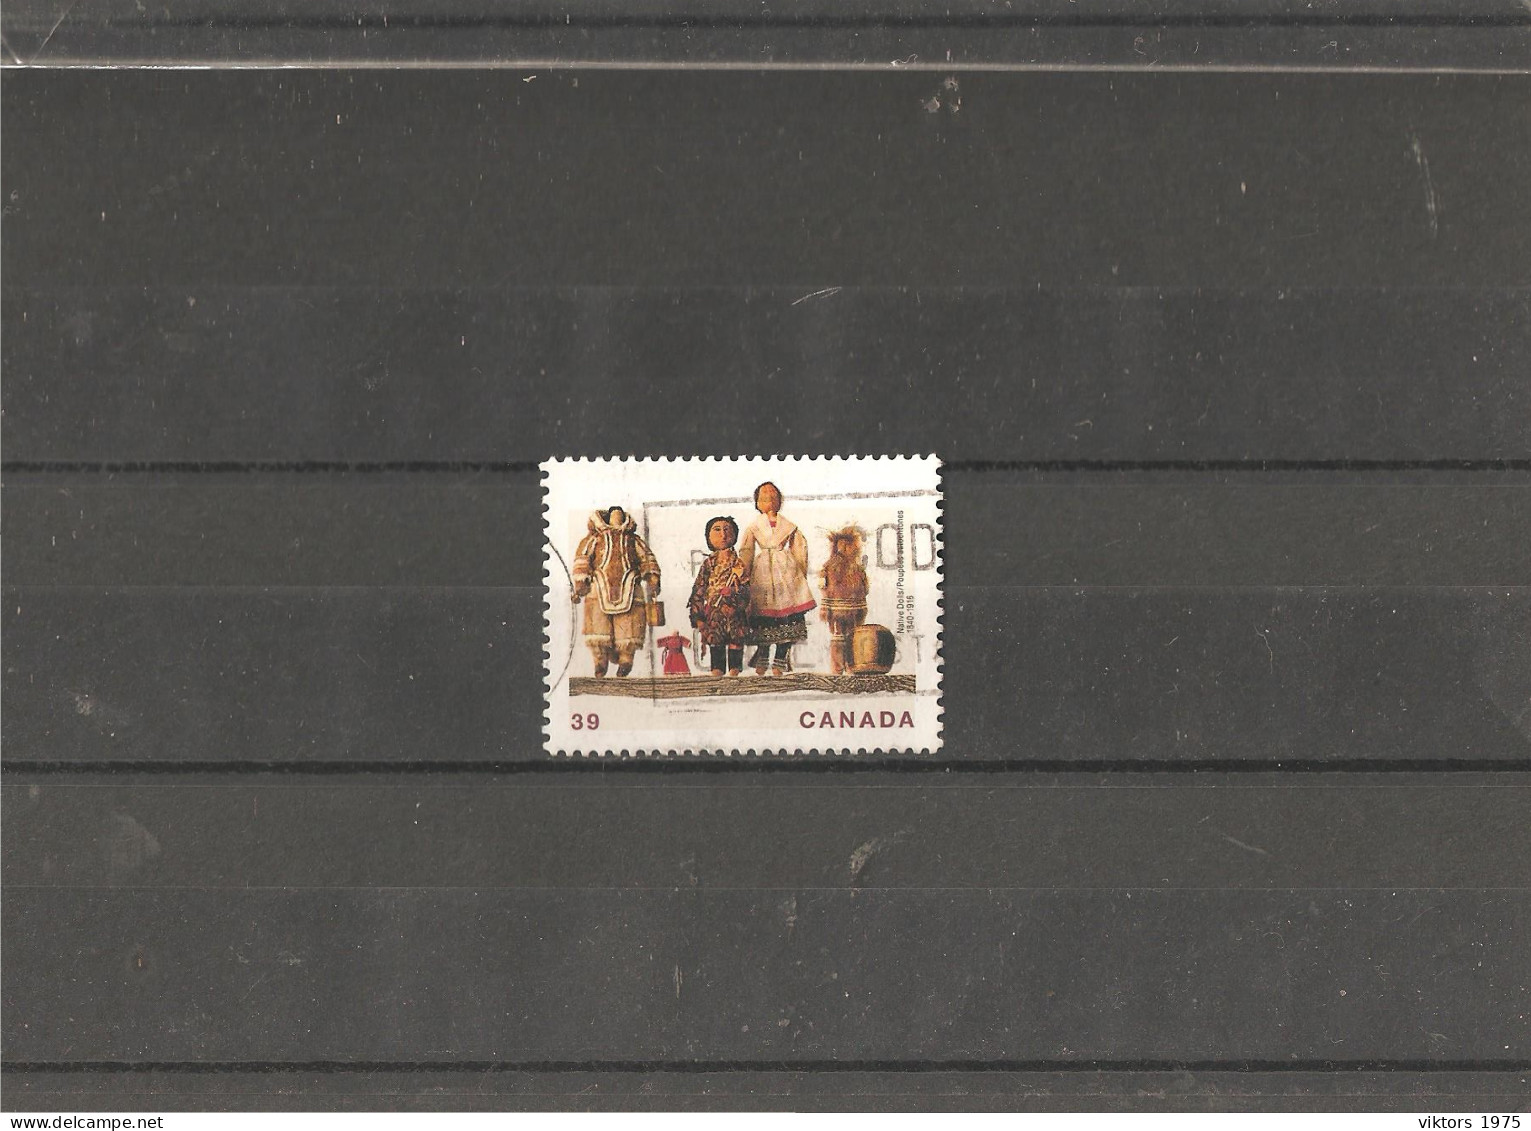 Used Stamp Nr.1324 In Darnell Catalog  - Used Stamps